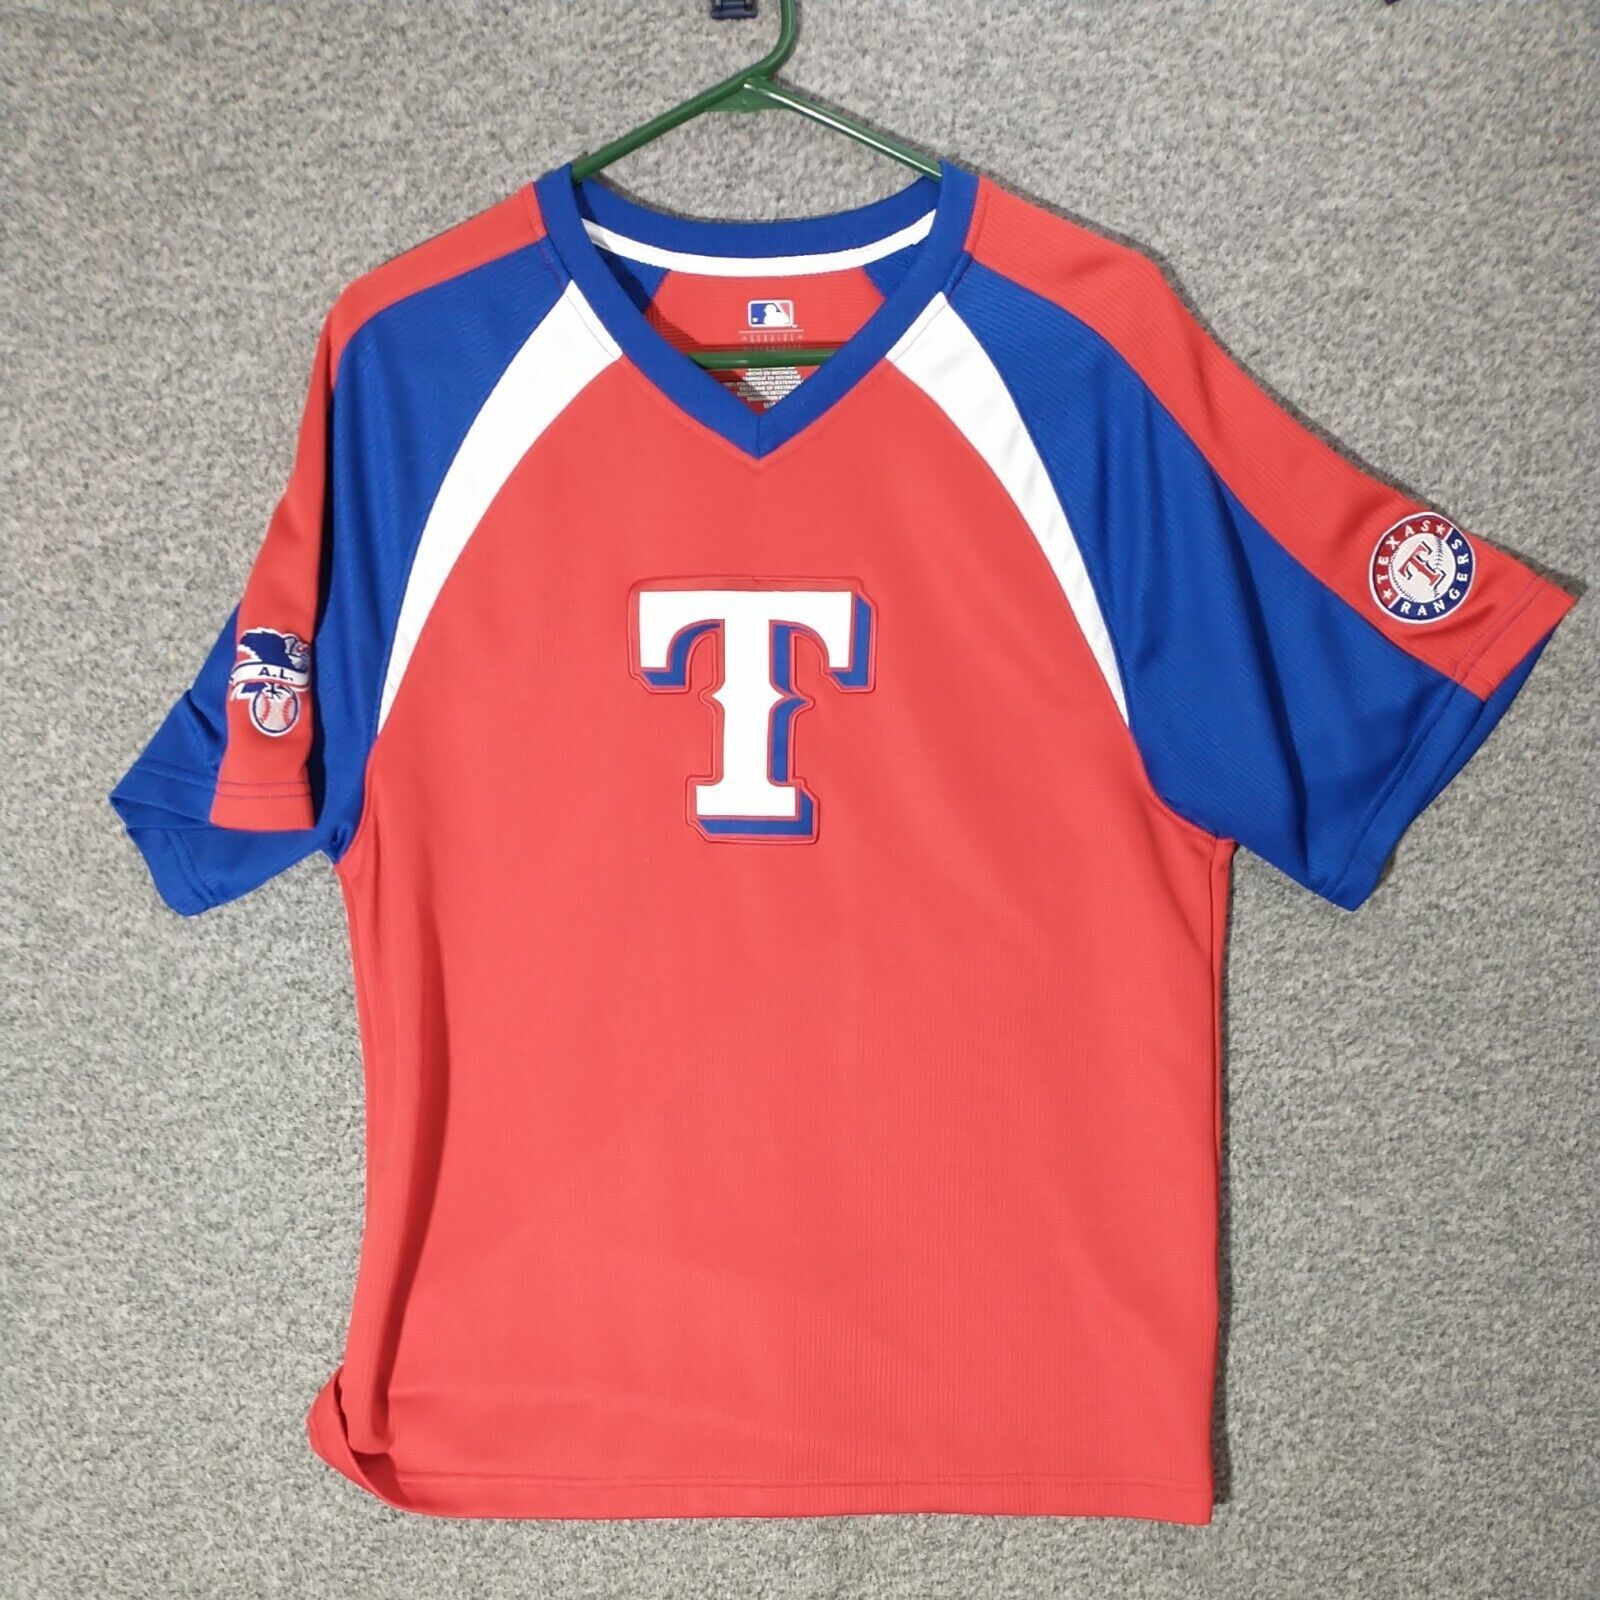 Men's Texas Rangers Majestic Road Gray Flex Base Authentic Collection Team  Jersey